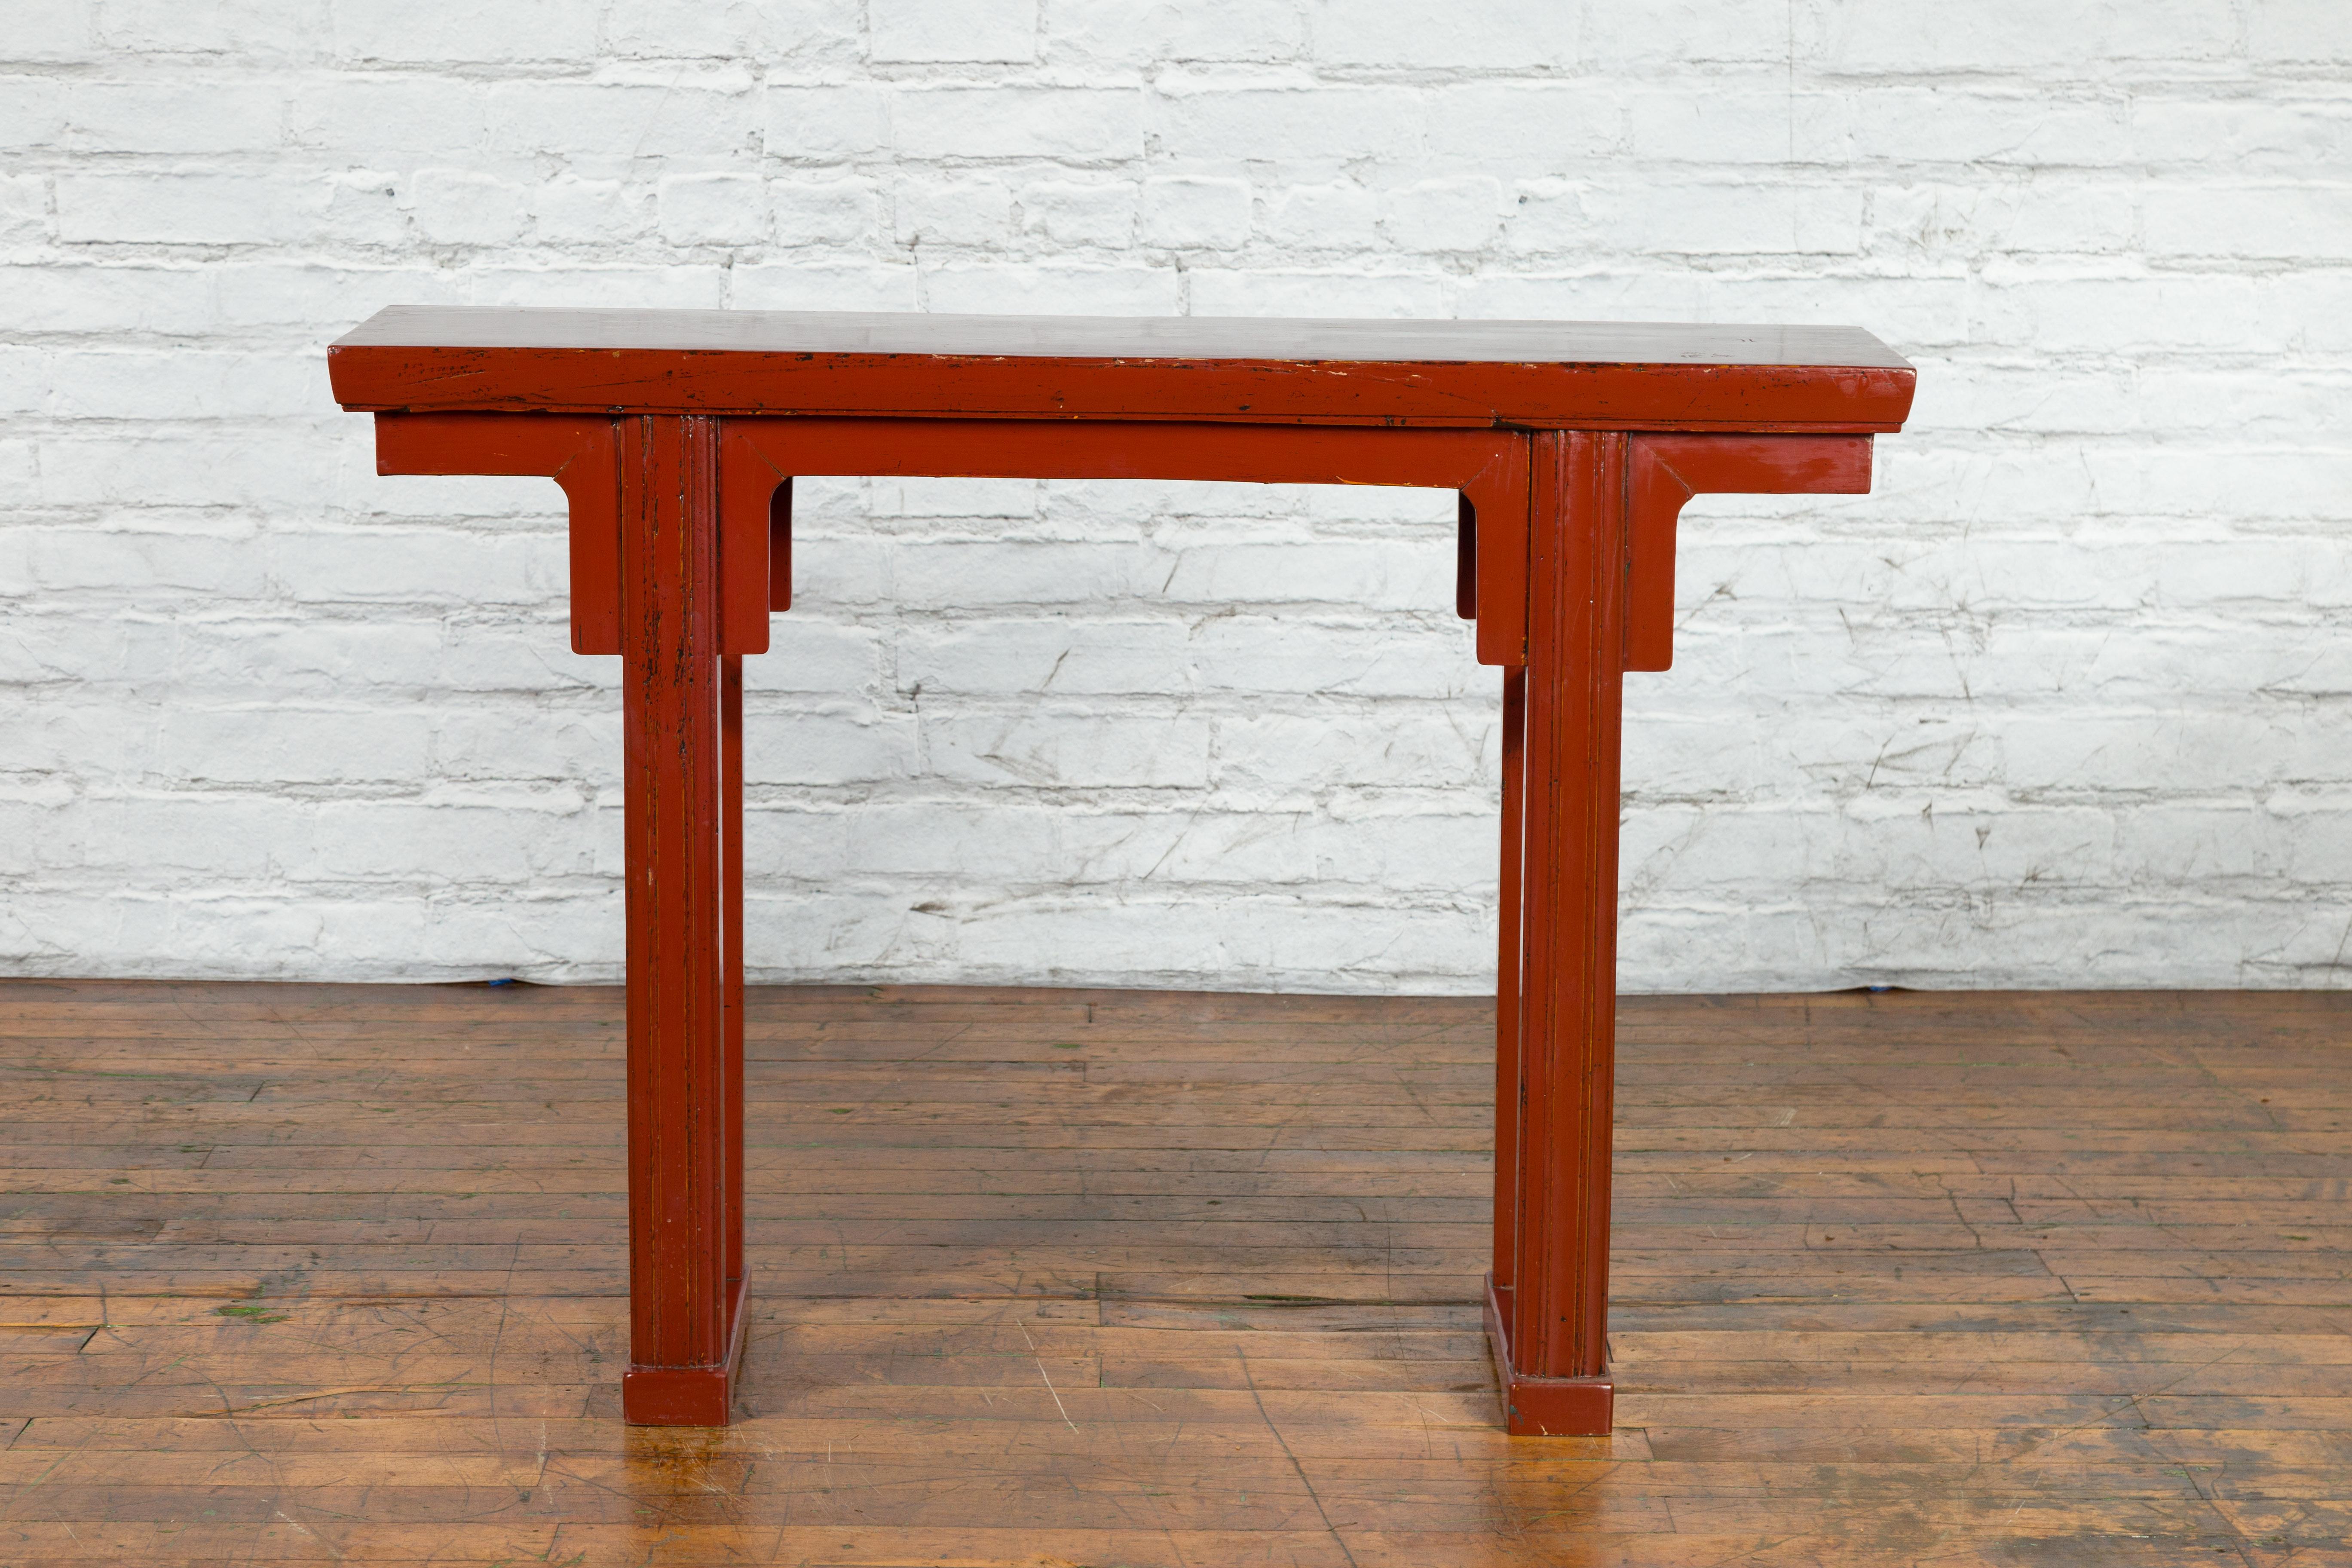 Lacquered 19th Century Chinese Qing Dynasty Period Red Lacquer Console Altar Table For Sale